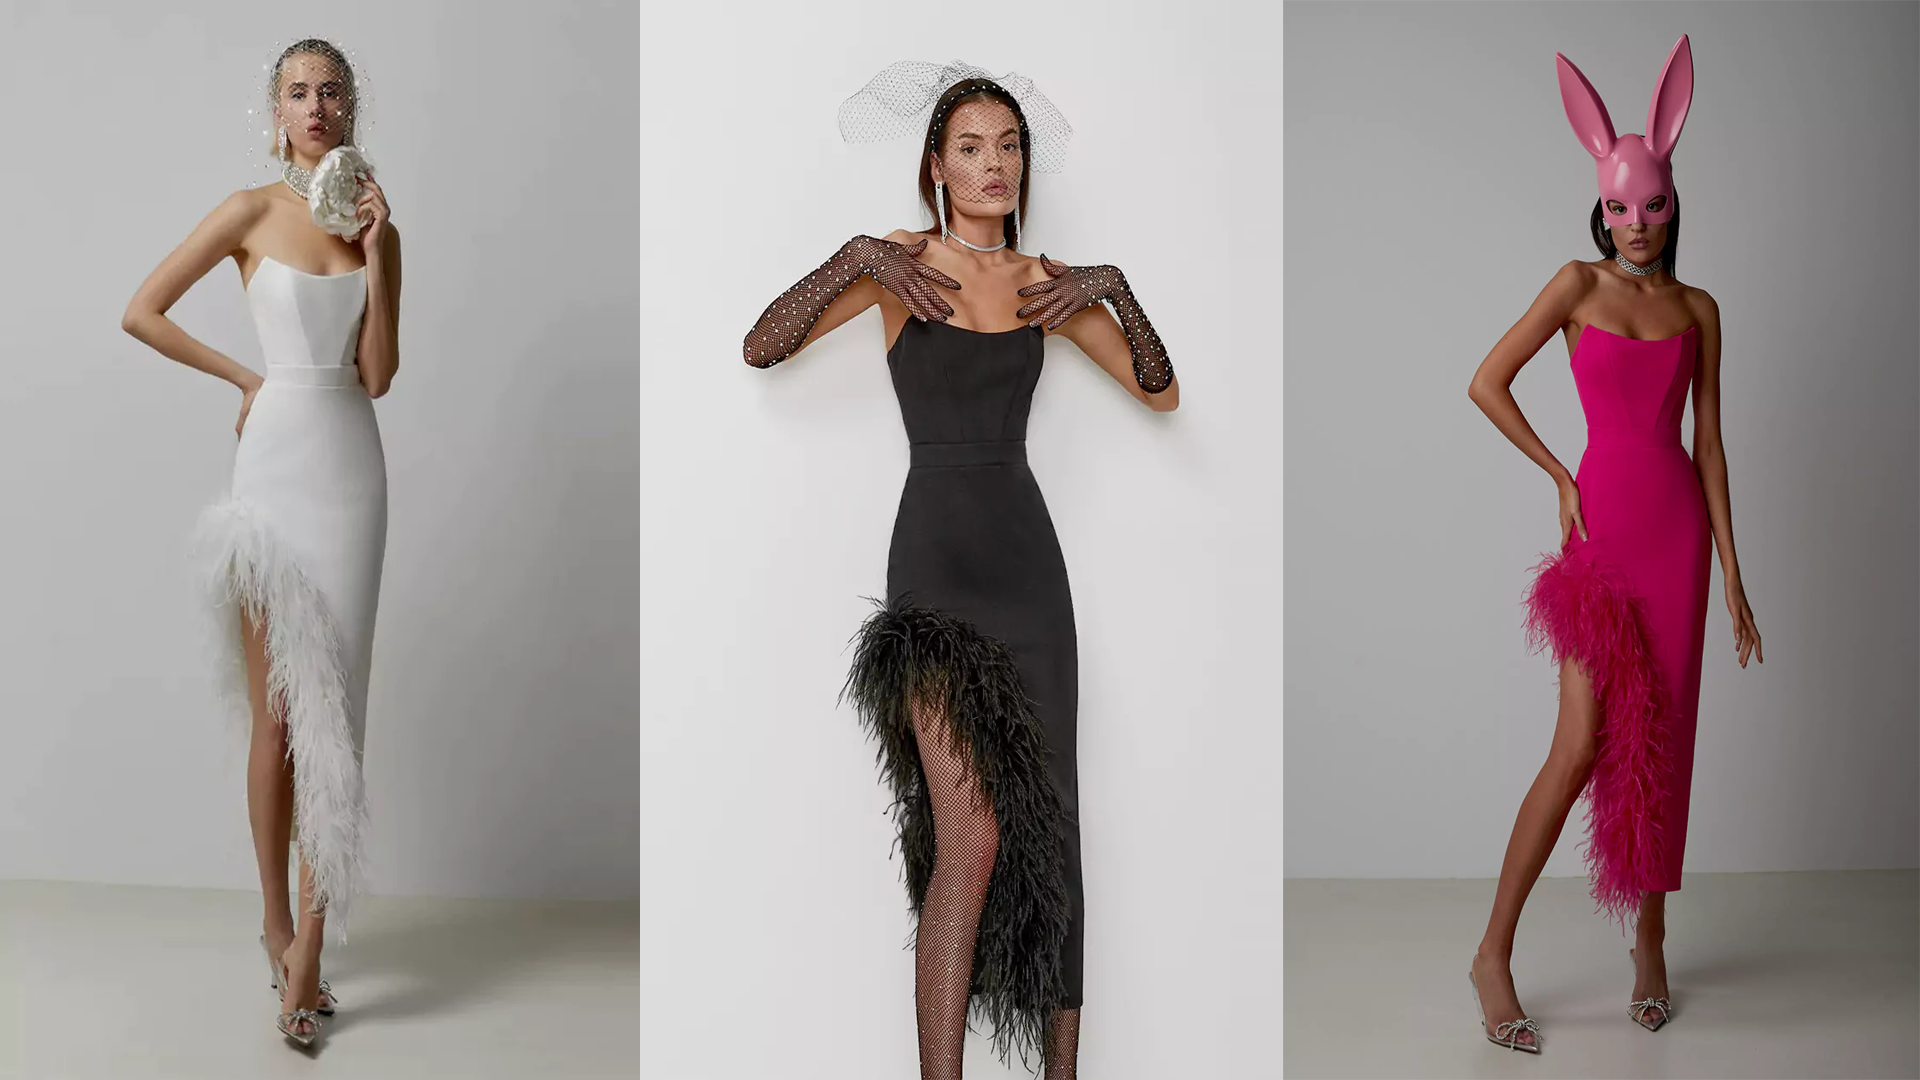 Feather Dresses as the Fashion Benchmark Trend of Present and Future